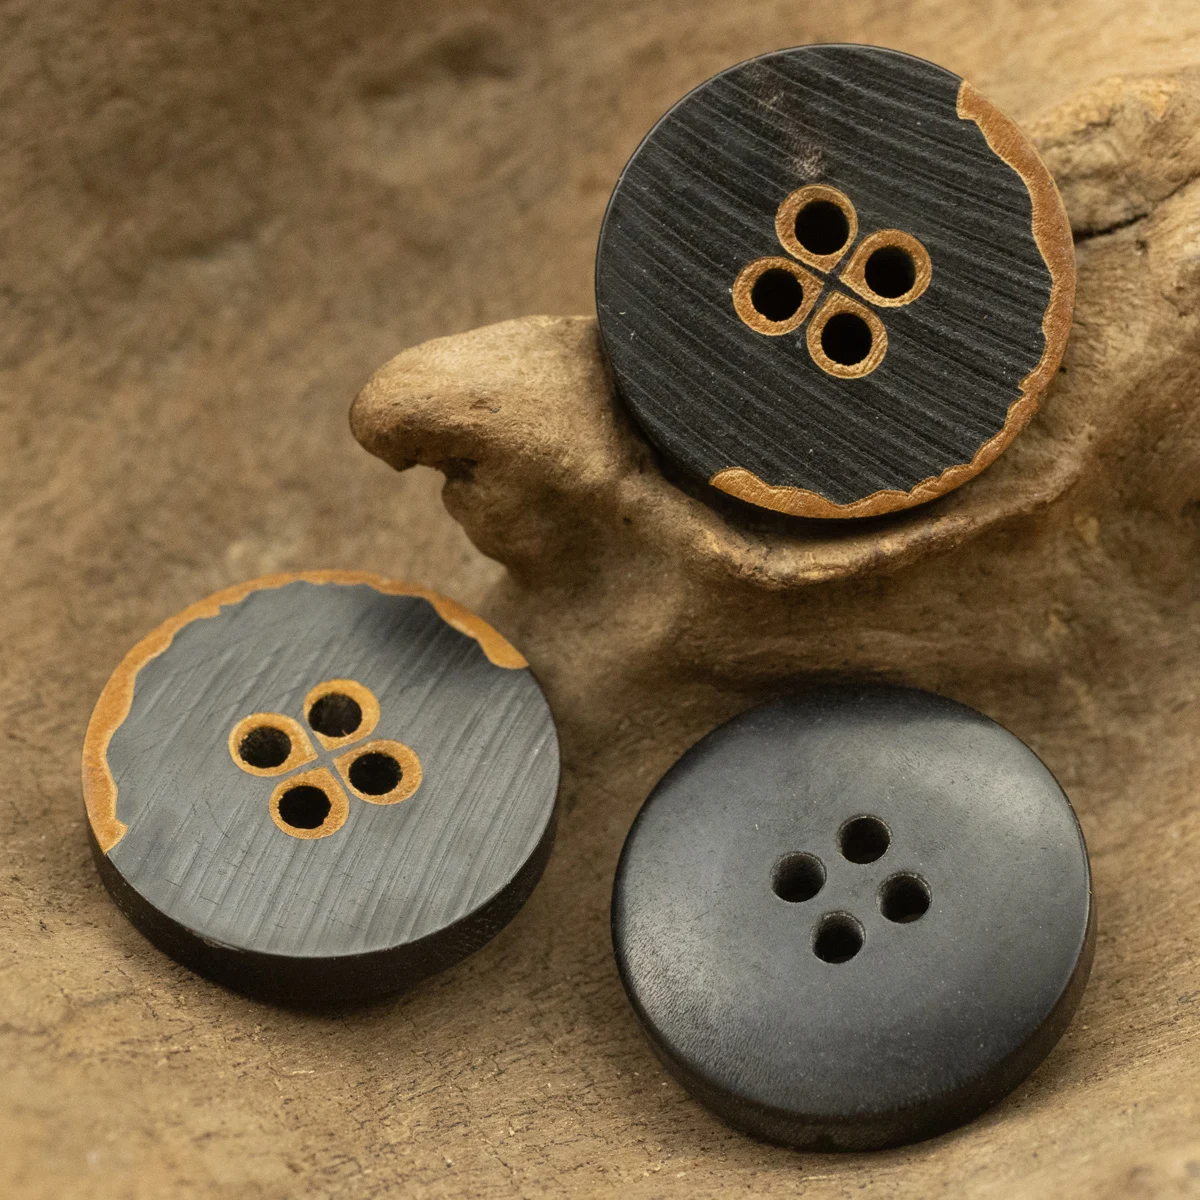 

NEW Scorched Hole Black Horn Buttons SOJO Original Suit Jacket Knitwear Sewing Accessories Texture Round Plain 11.3mm-25mm